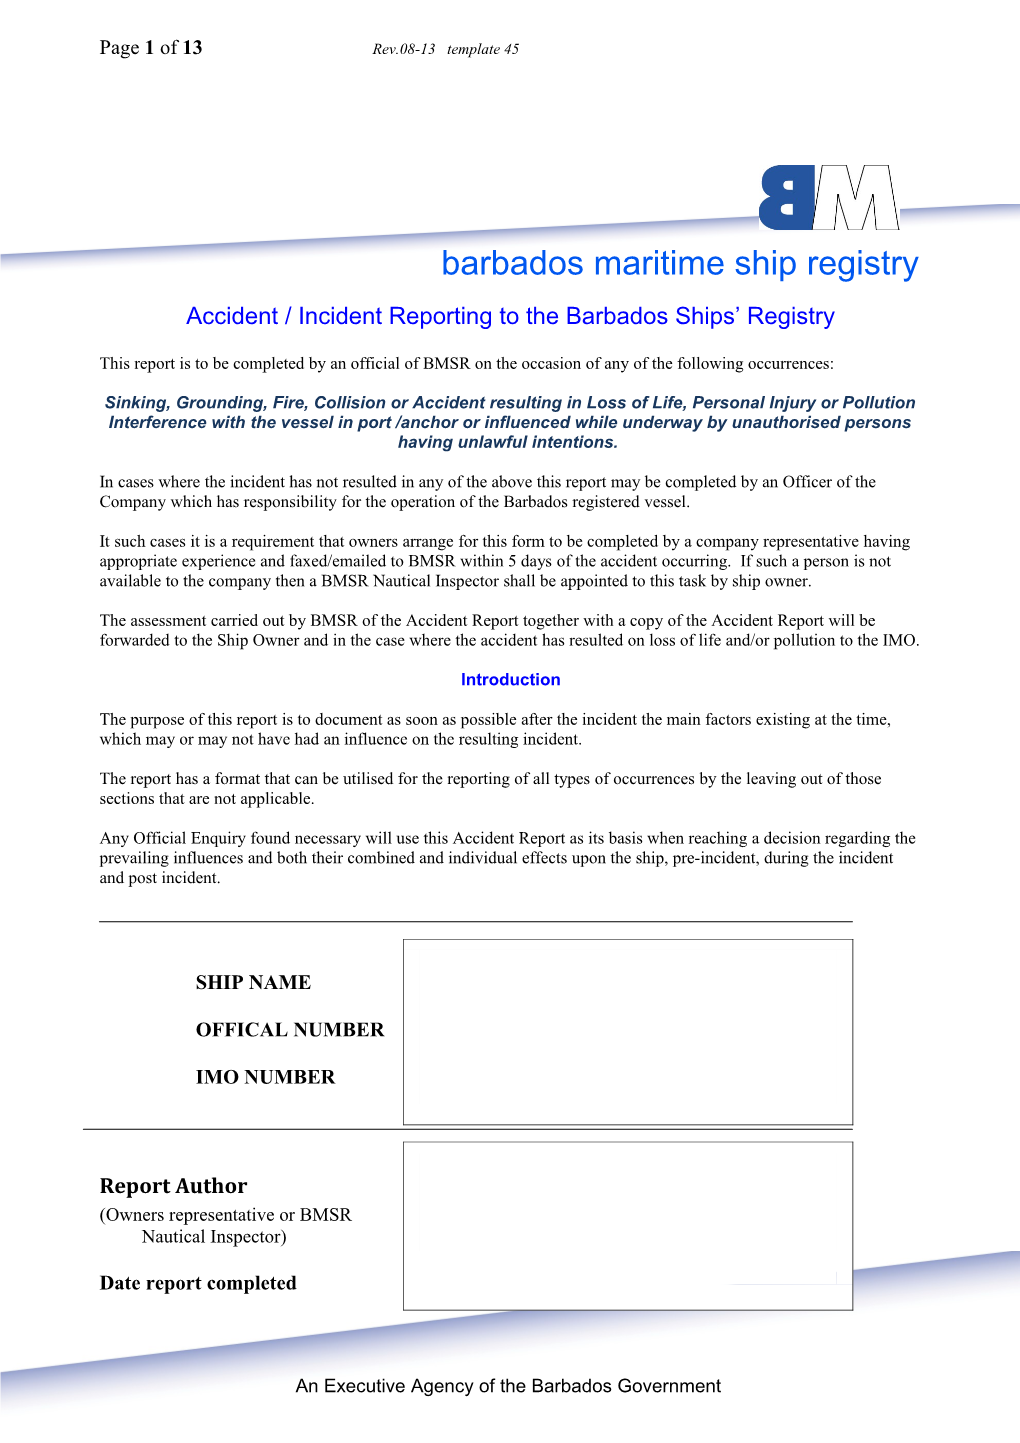 Accident / Incident Reporting to the Barbados Ships Registry